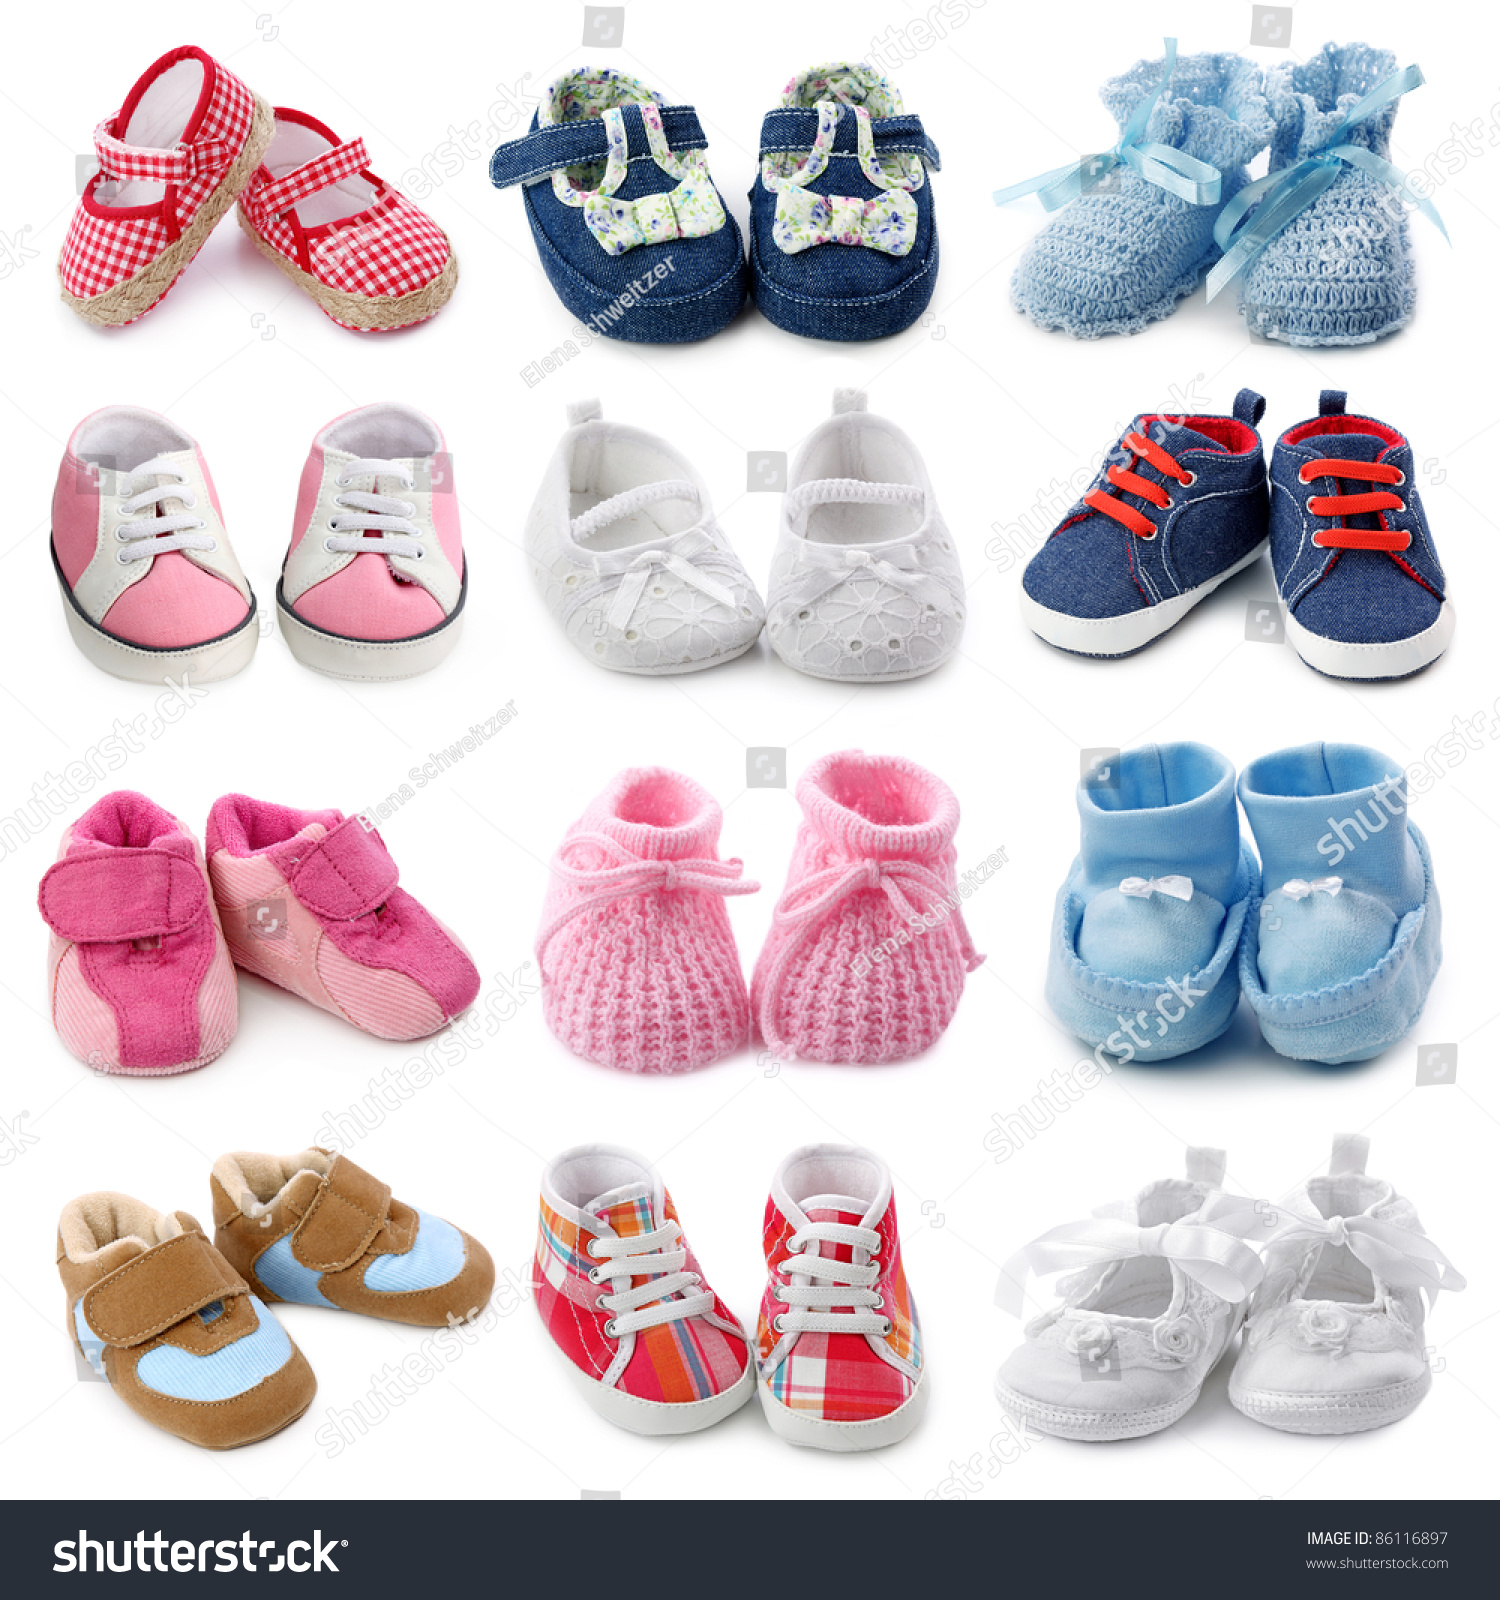 Baby shoes collection #86116897